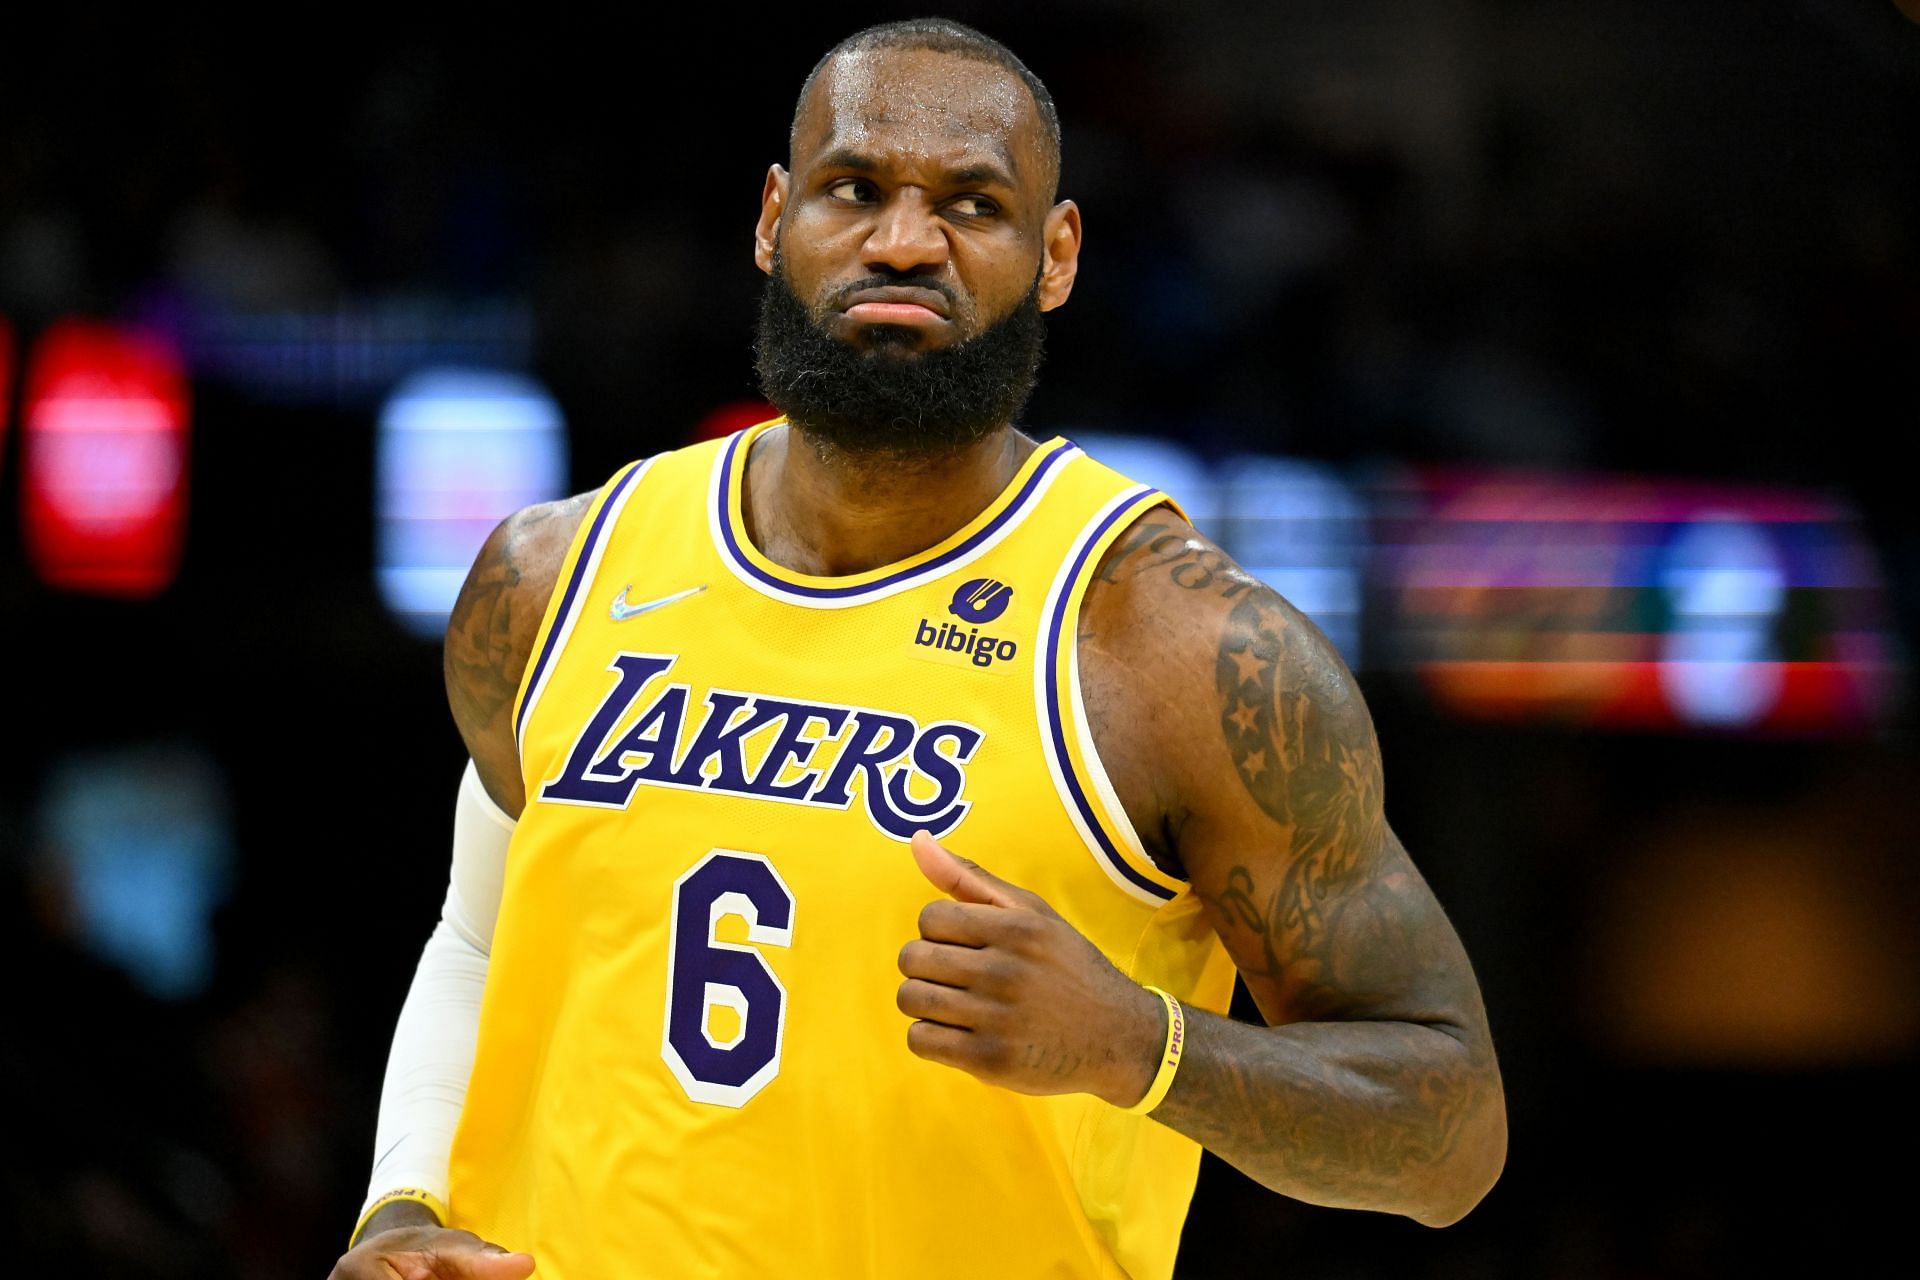 LA Lakers star LeBron James has signed an extension on his current contract